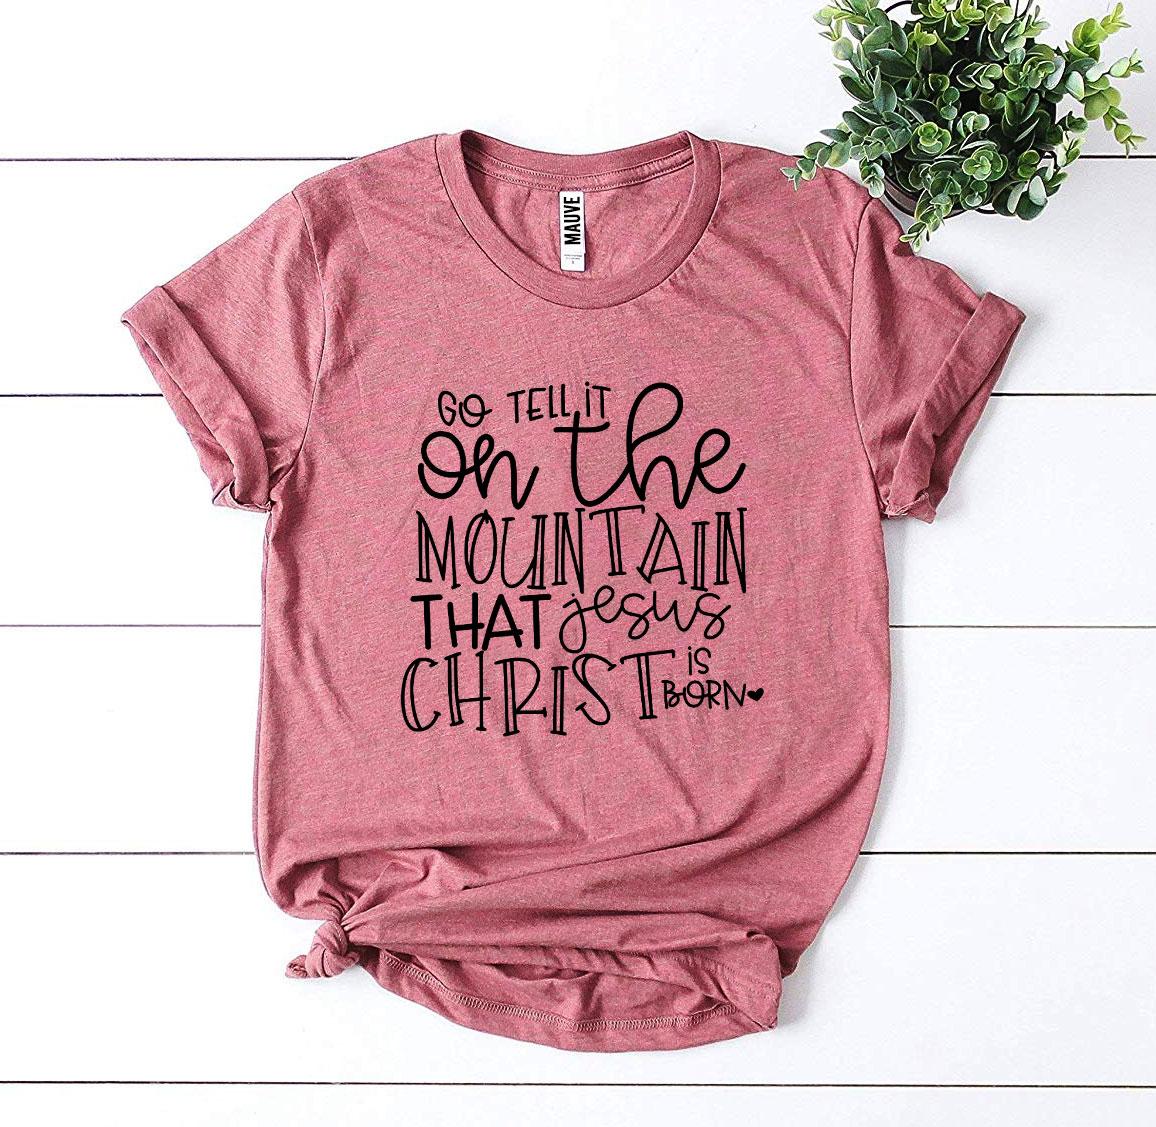 Go Tell It On The Mountain T-shirt